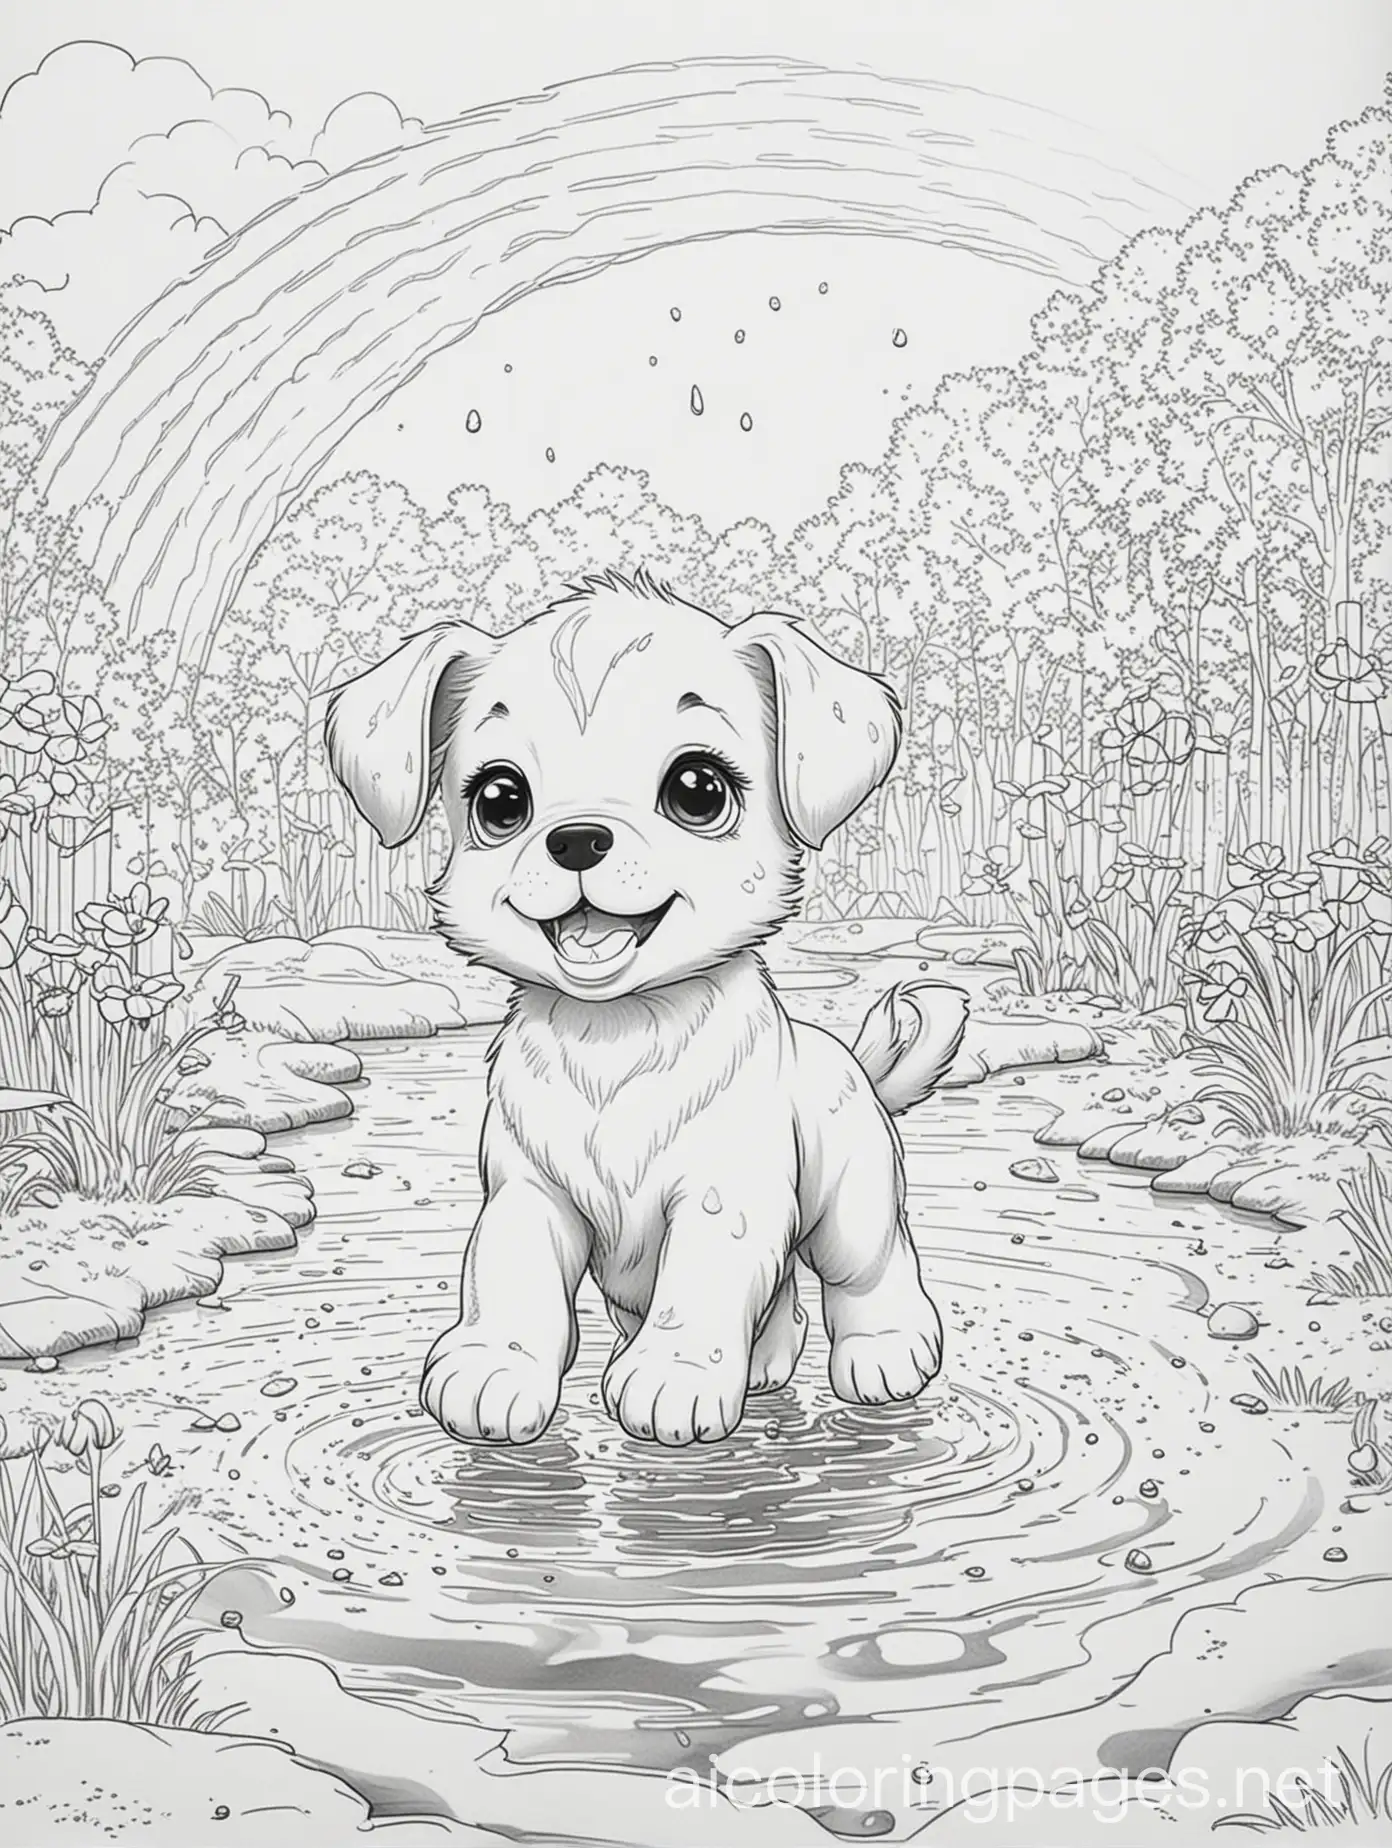 Cute puppy splashing in a puddle under a rainbow on a sunny day in a park scene , Coloring Page, black and white, line art, white background, Simplicity, Ample White Space. The background of the coloring page is plain white to make it easy for young children to color within the lines. The outlines of all the subjects are easy to distinguish, making it simple for kids to color without too much difficulty, Coloring Page, black and white, line art, white background, Simplicity, Ample White Space. The background of the coloring page is plain white to make it easy for young children to color within the lines. The outlines of all the subjects are easy to distinguish, making it simple for kids to color without too much difficulty